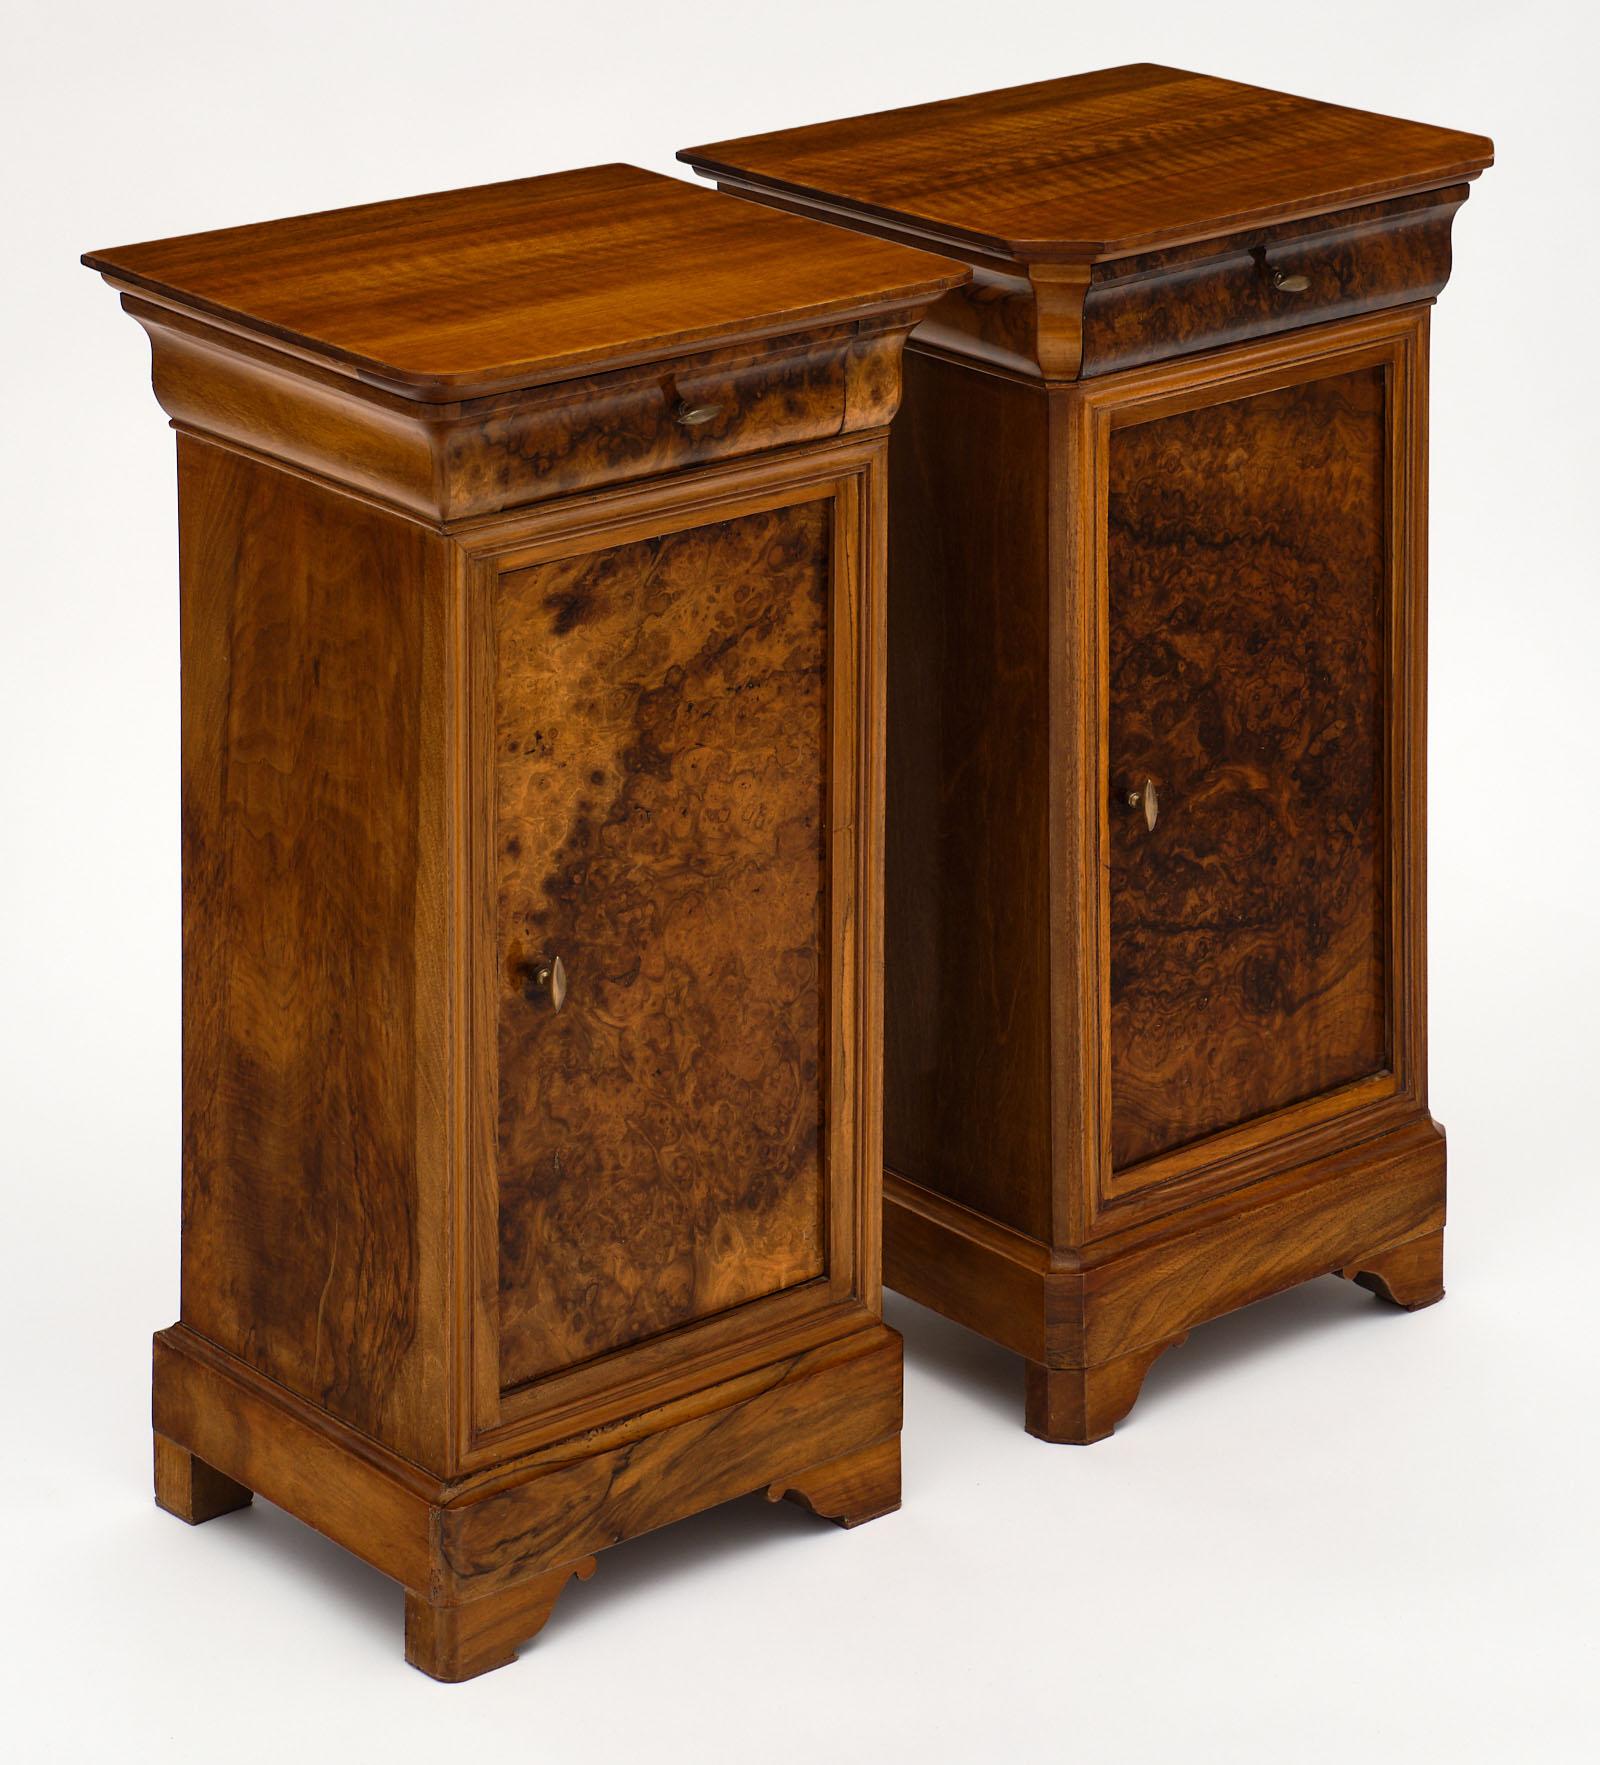 French Antique burled walnut side tables featuring a striking, lustrous French polish finish. The wood is in excellent antique condition, and we love the details of the pair. One features curved corners, while the other has cut corners. Each has a